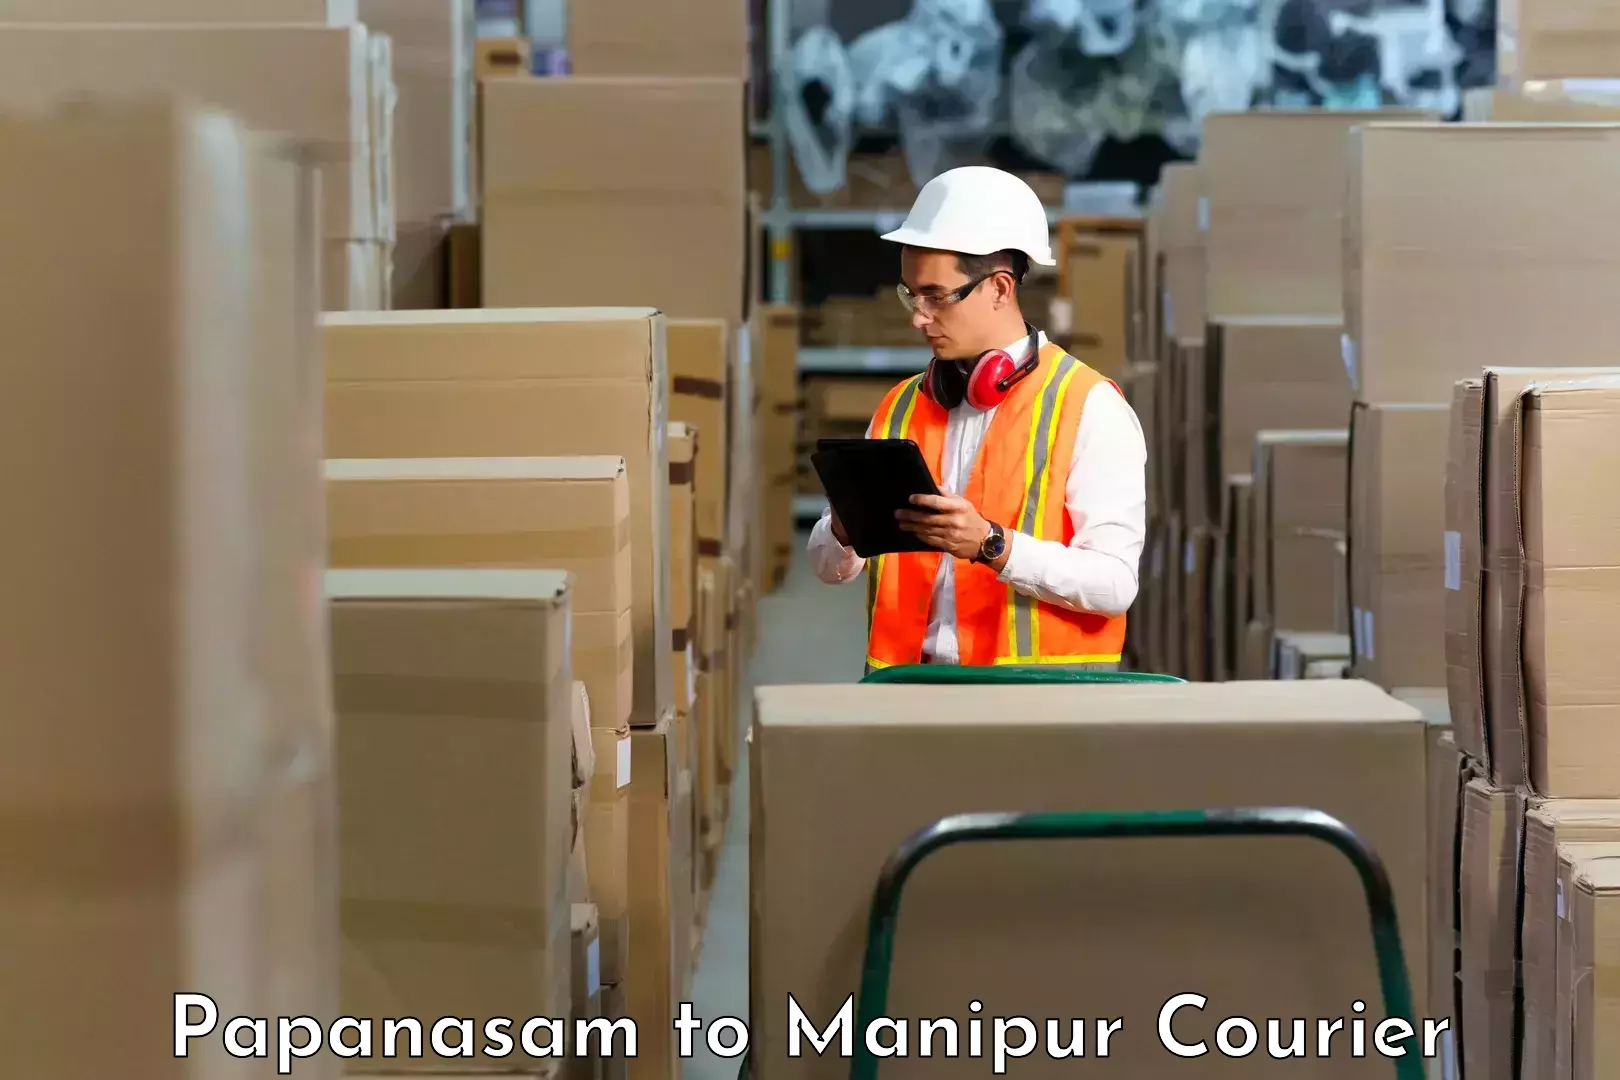 Customer-centric shipping in Papanasam to Manipur